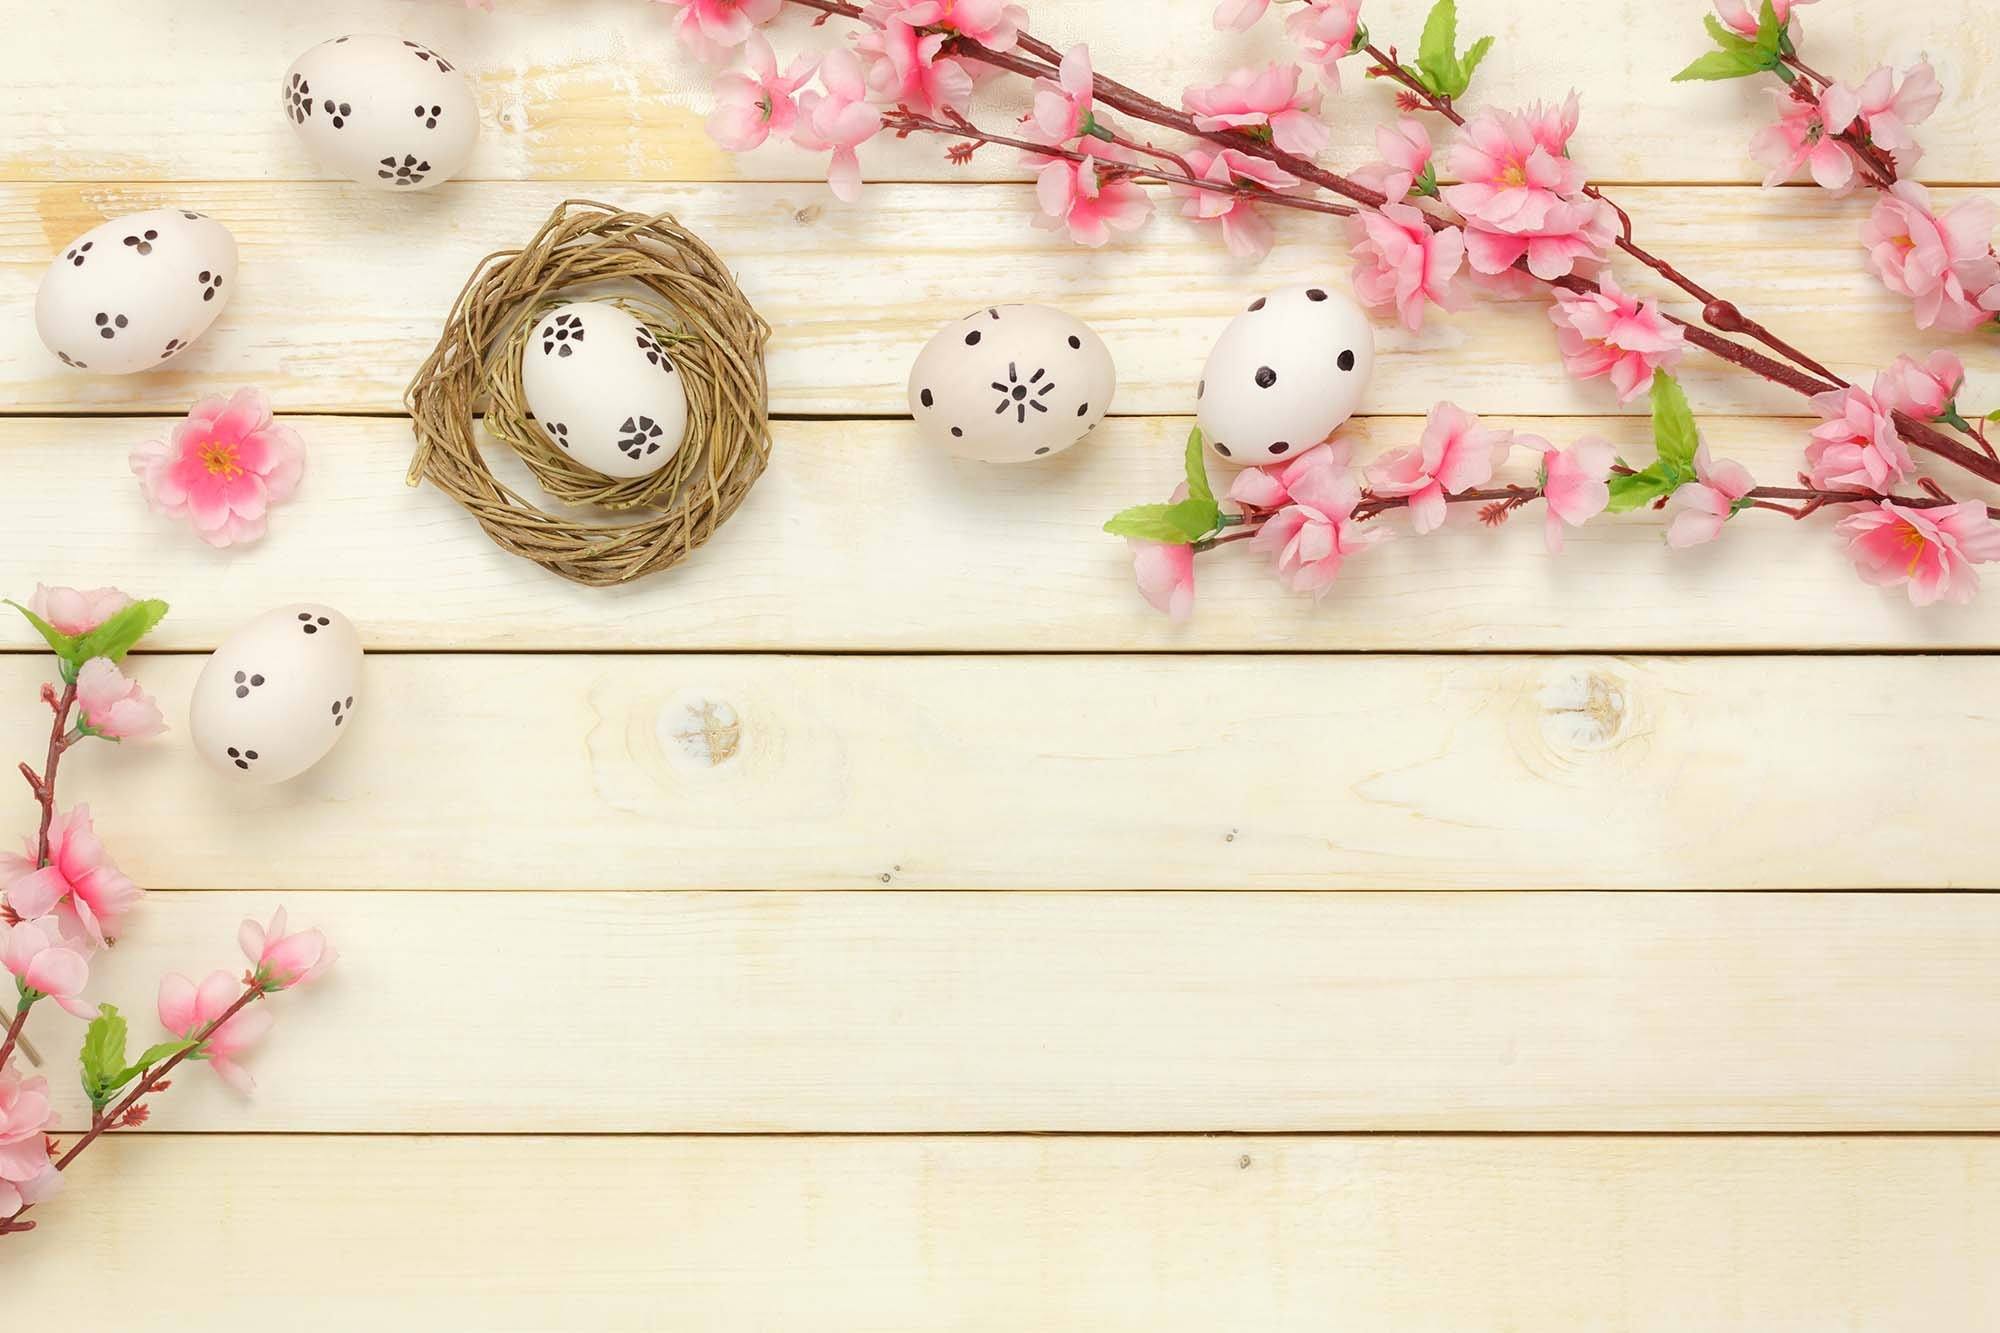 Flowers And Easter Eggs On The Wood Floor Backdrop For Baby Backdrop Shopbackdrop